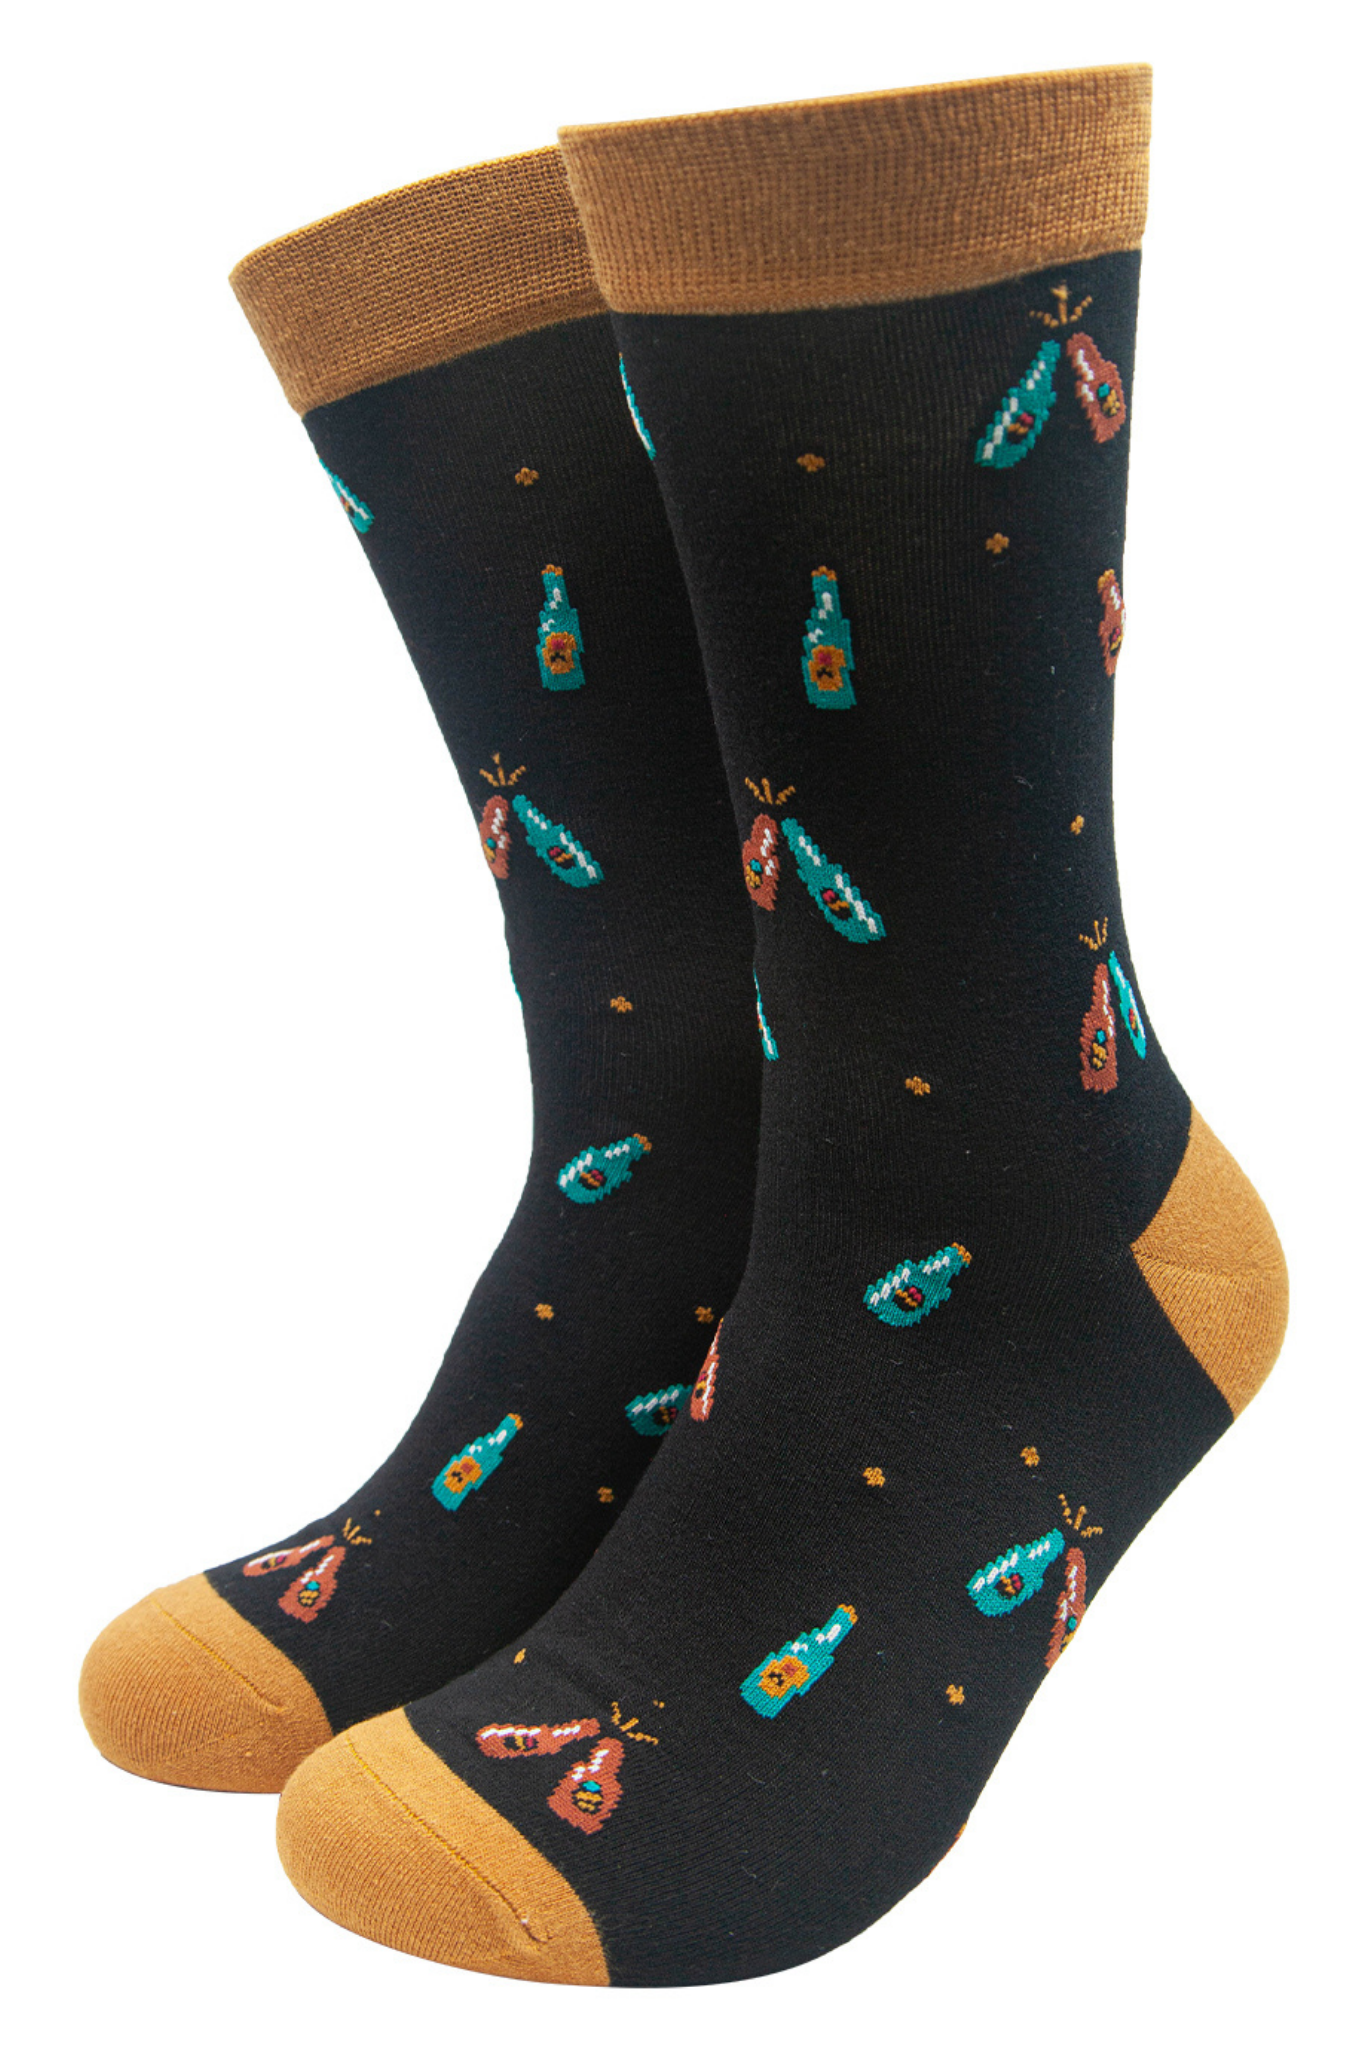 black bamboo dress socks with an all over print featuring beer bottles